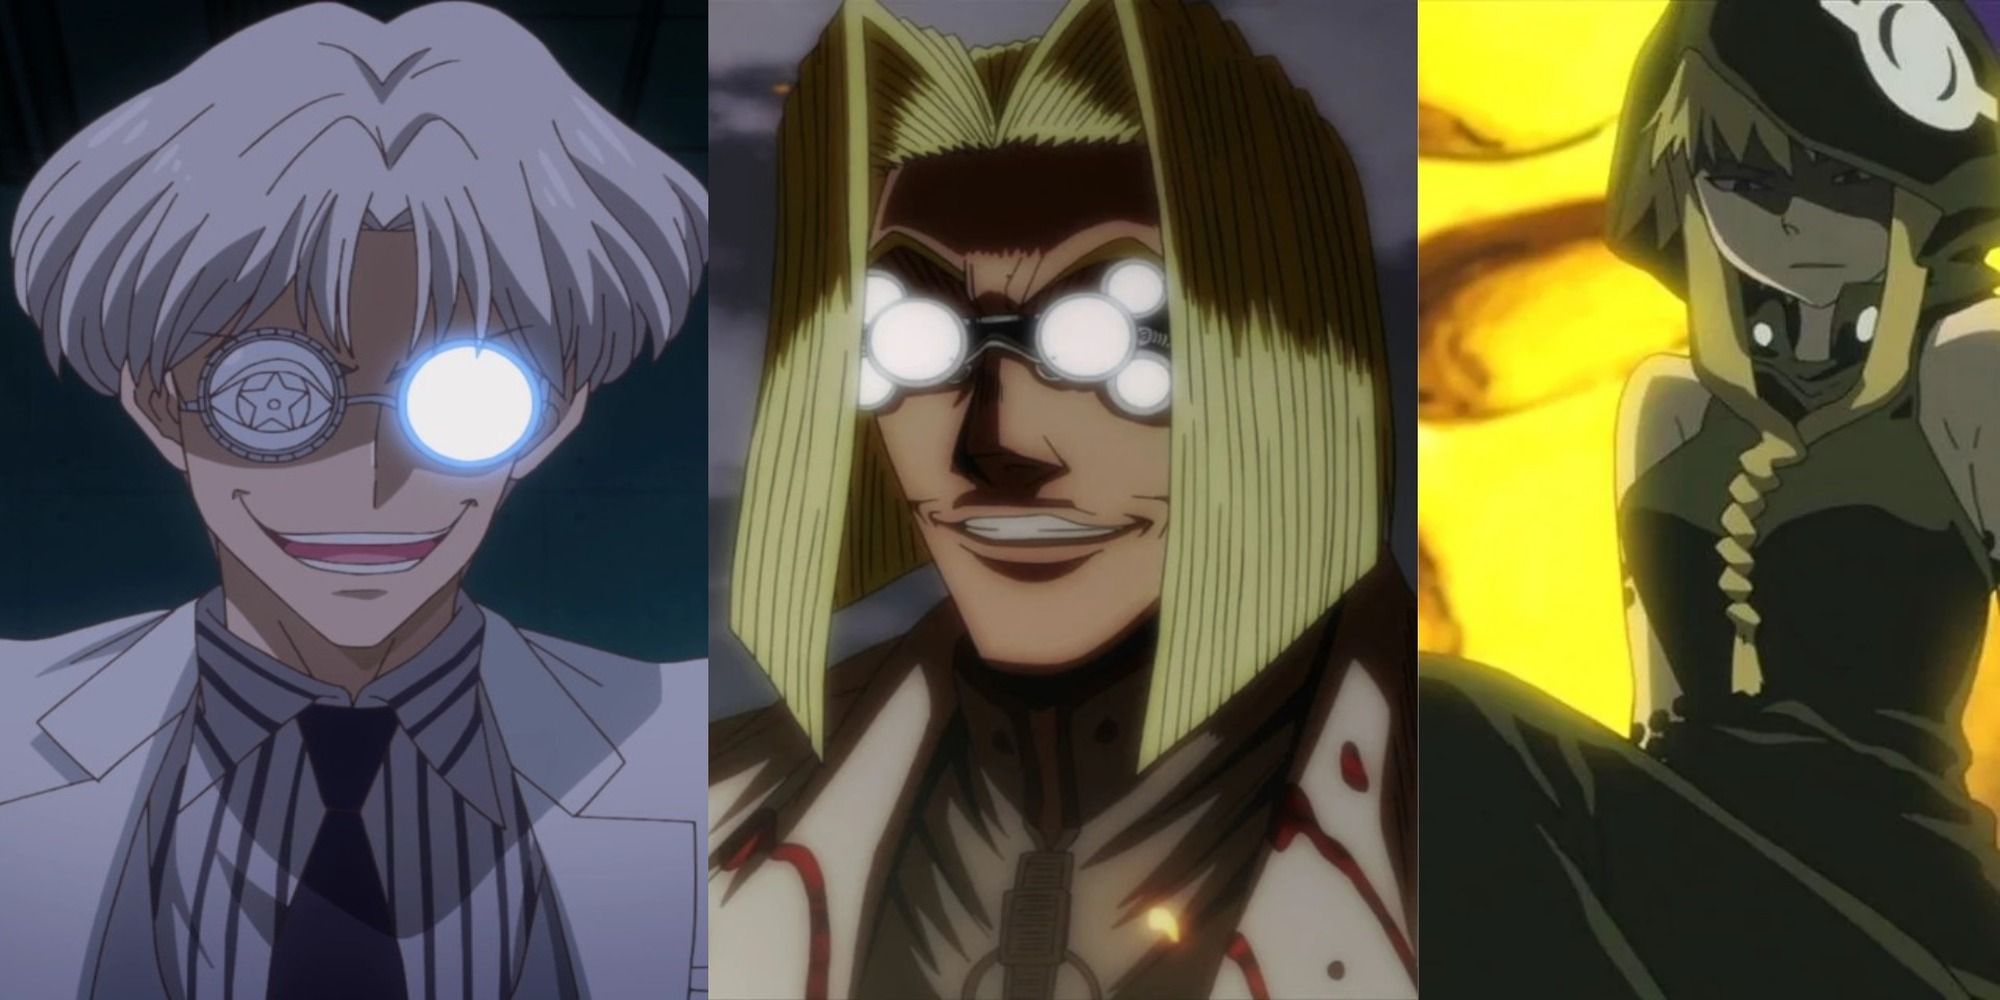 10 Of The Best Anime Scientists That Will Make You Think